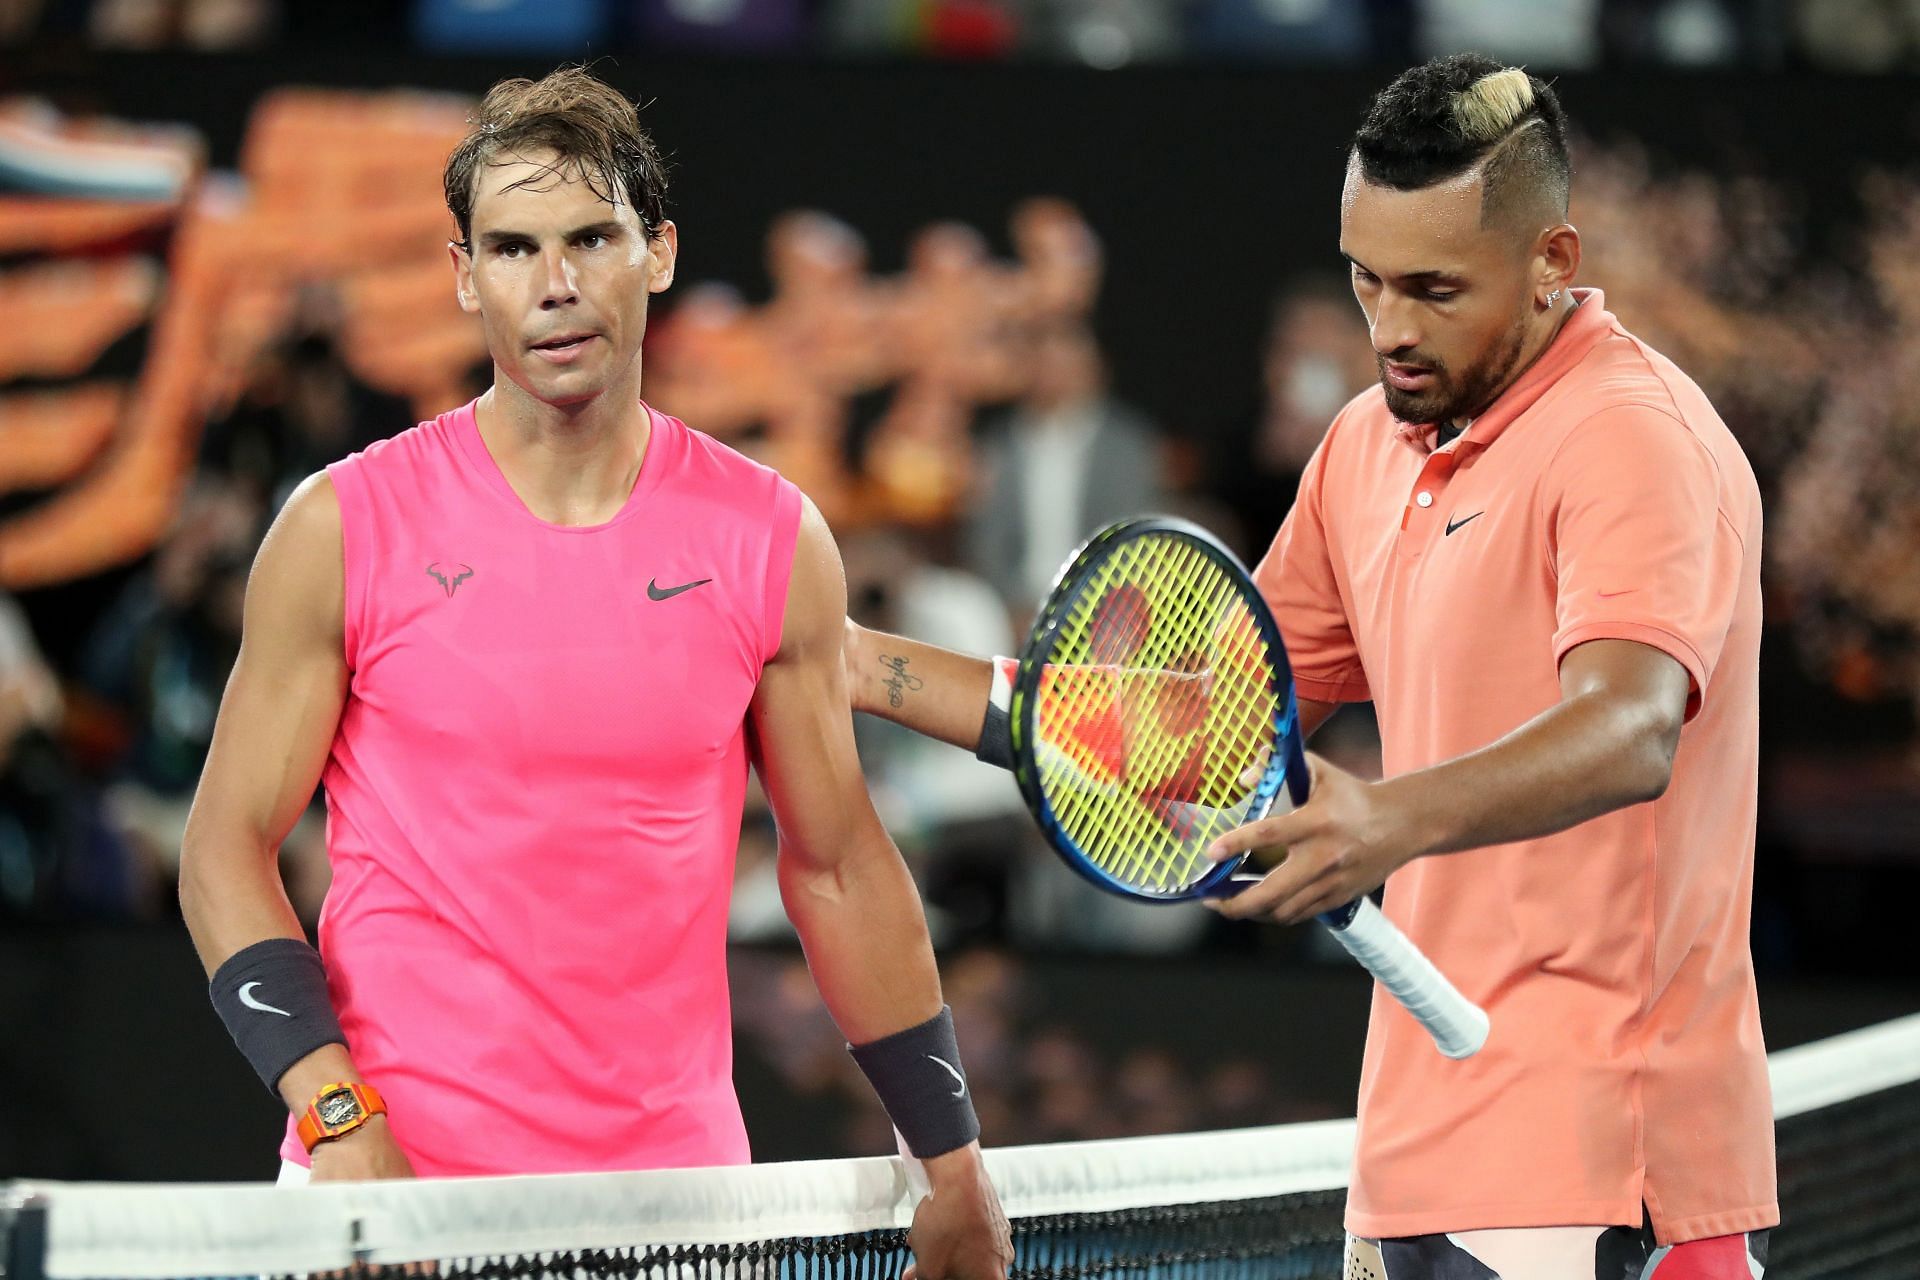 Rafael Nadal and Nick Kyrgios will face each other next.